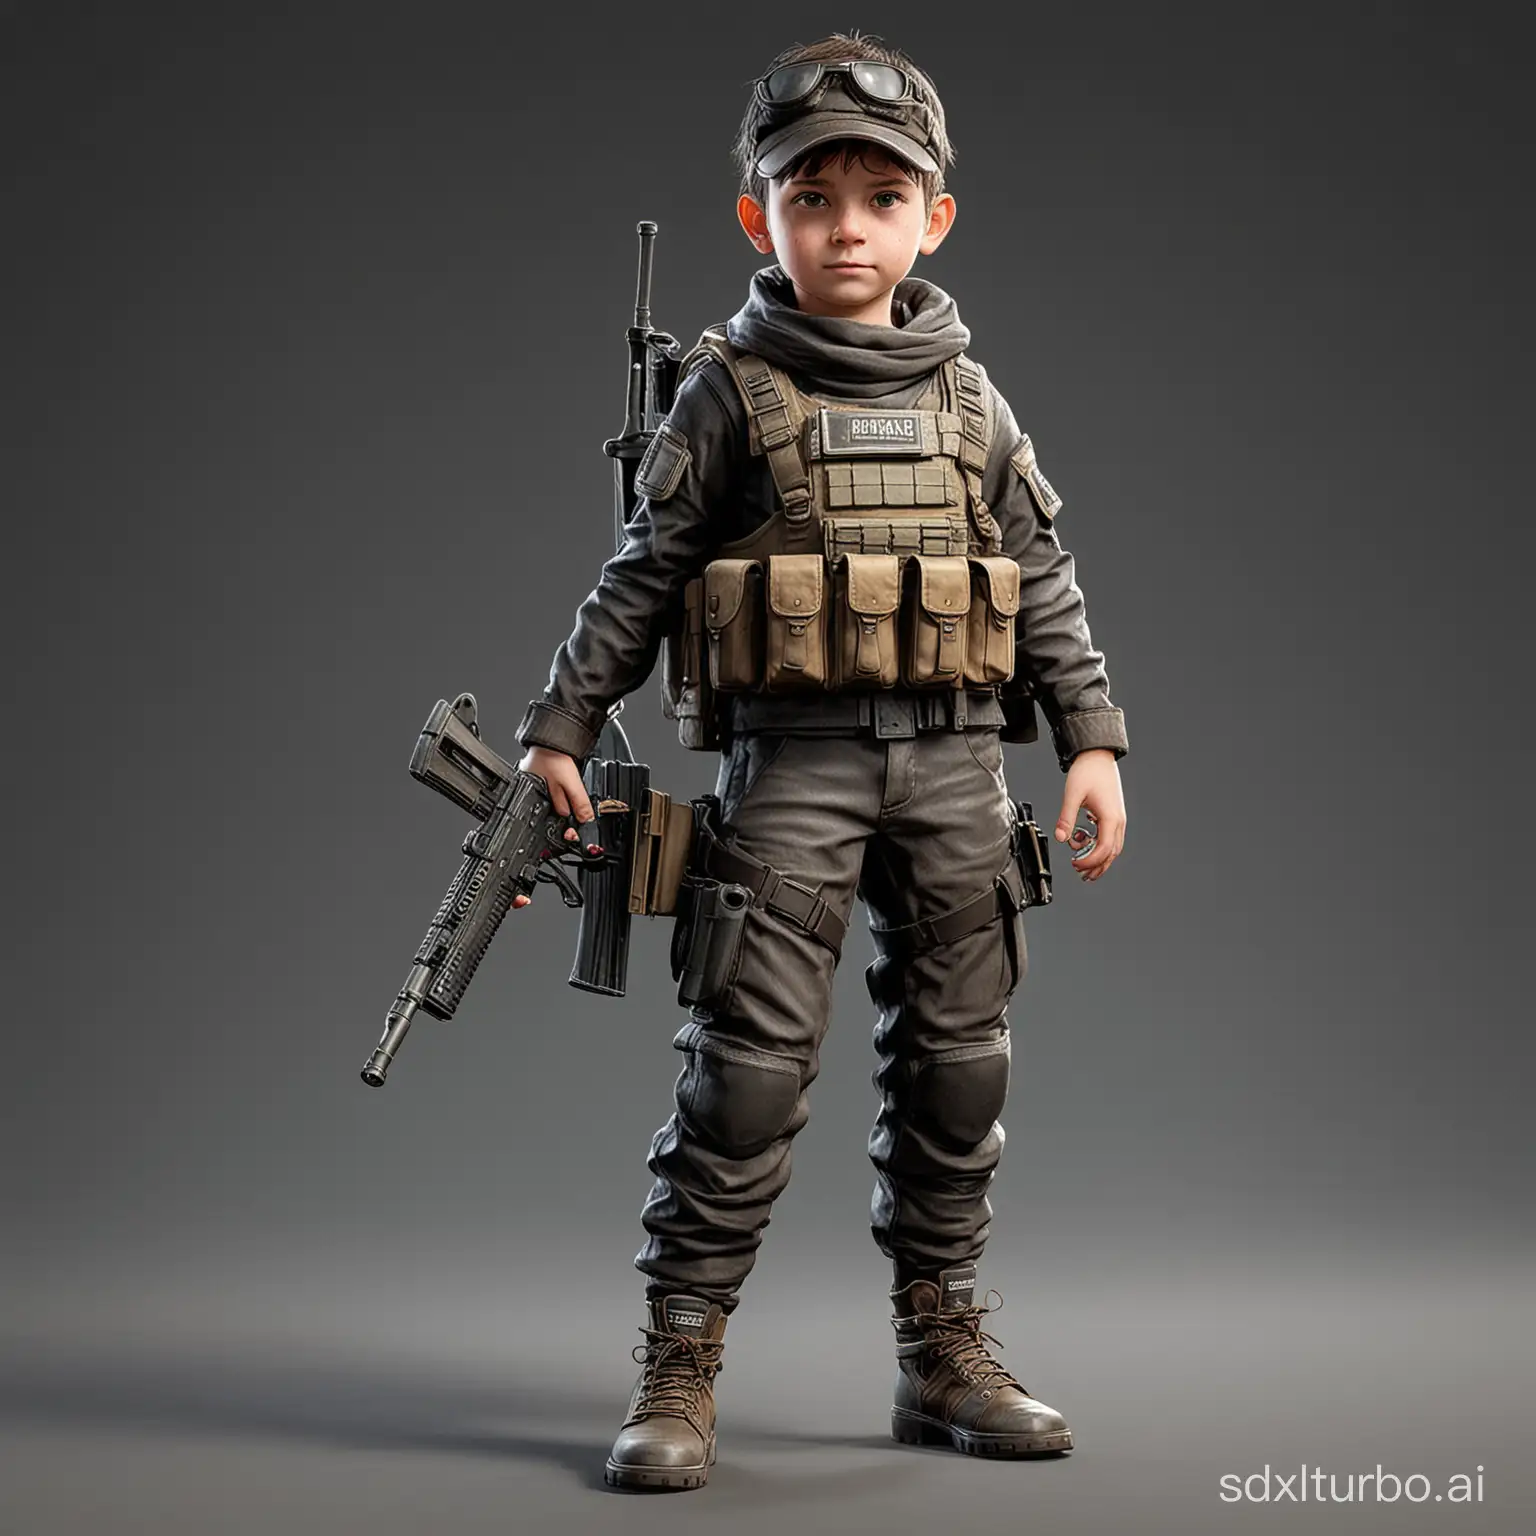 Young-PUBG-Character-in-Full-Armor-with-M416-Assault-Rifle